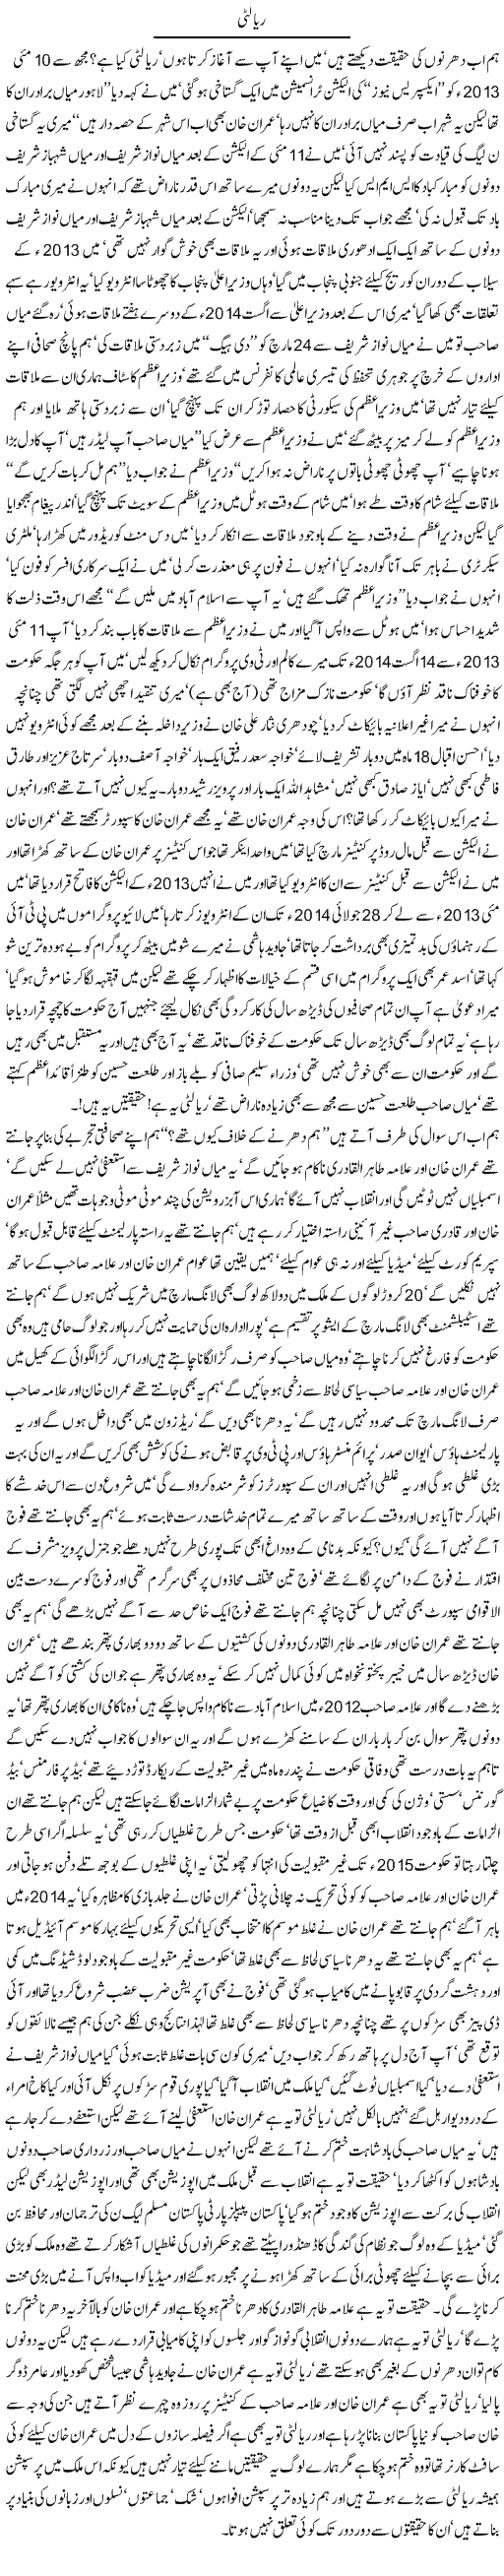 Reality by Javed Chaudhry